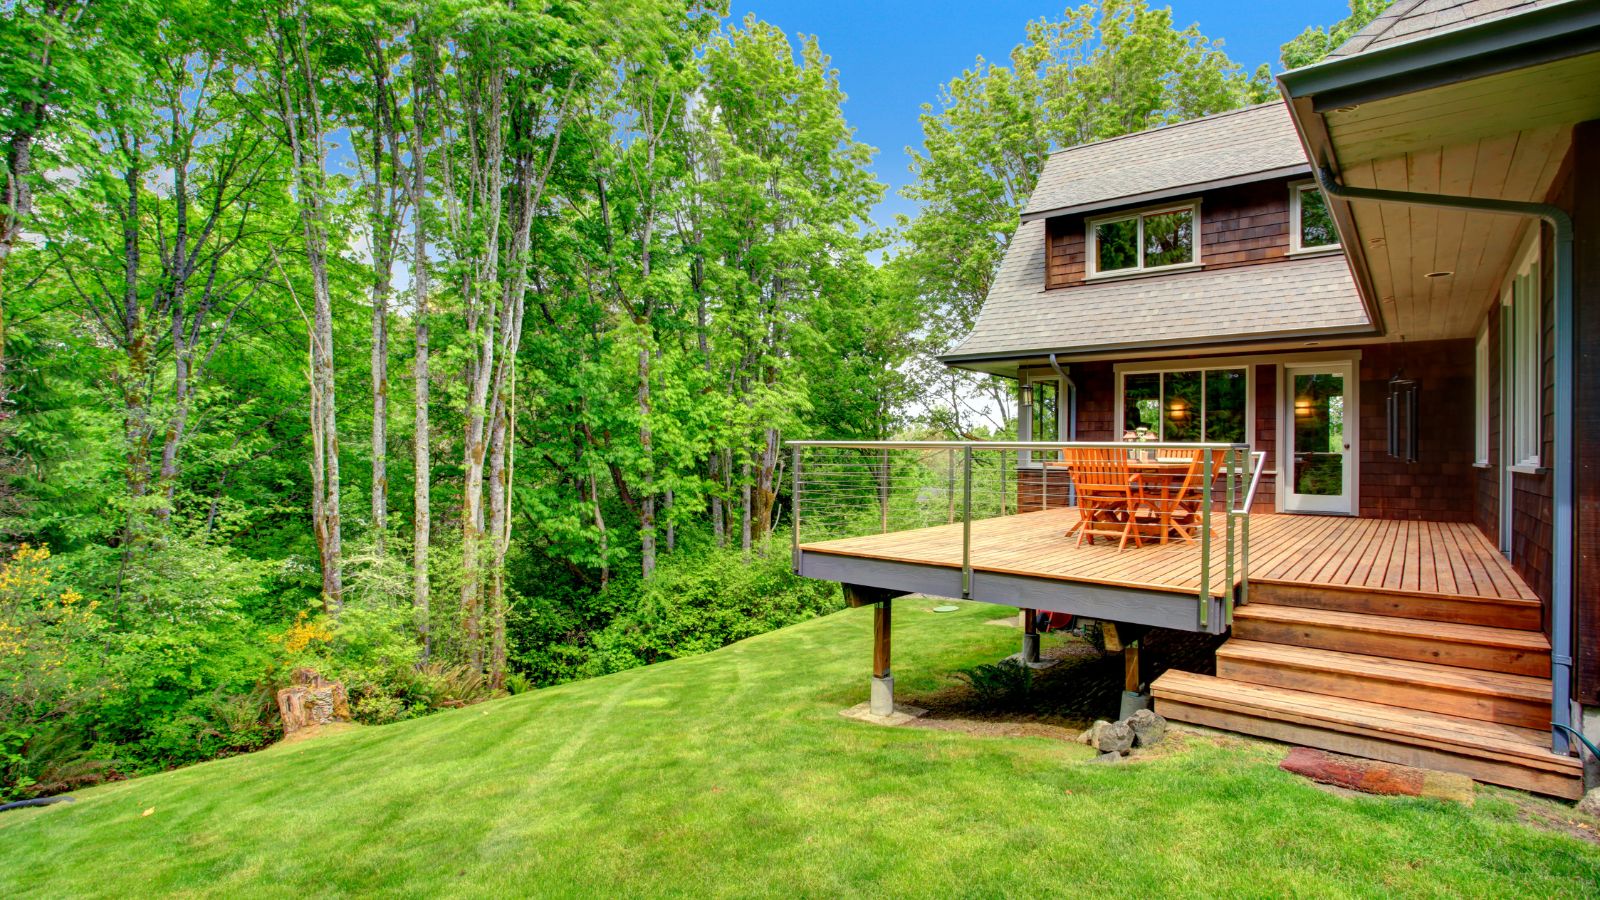 Don't let a sloped backyard stop you from having the garden of your dreams